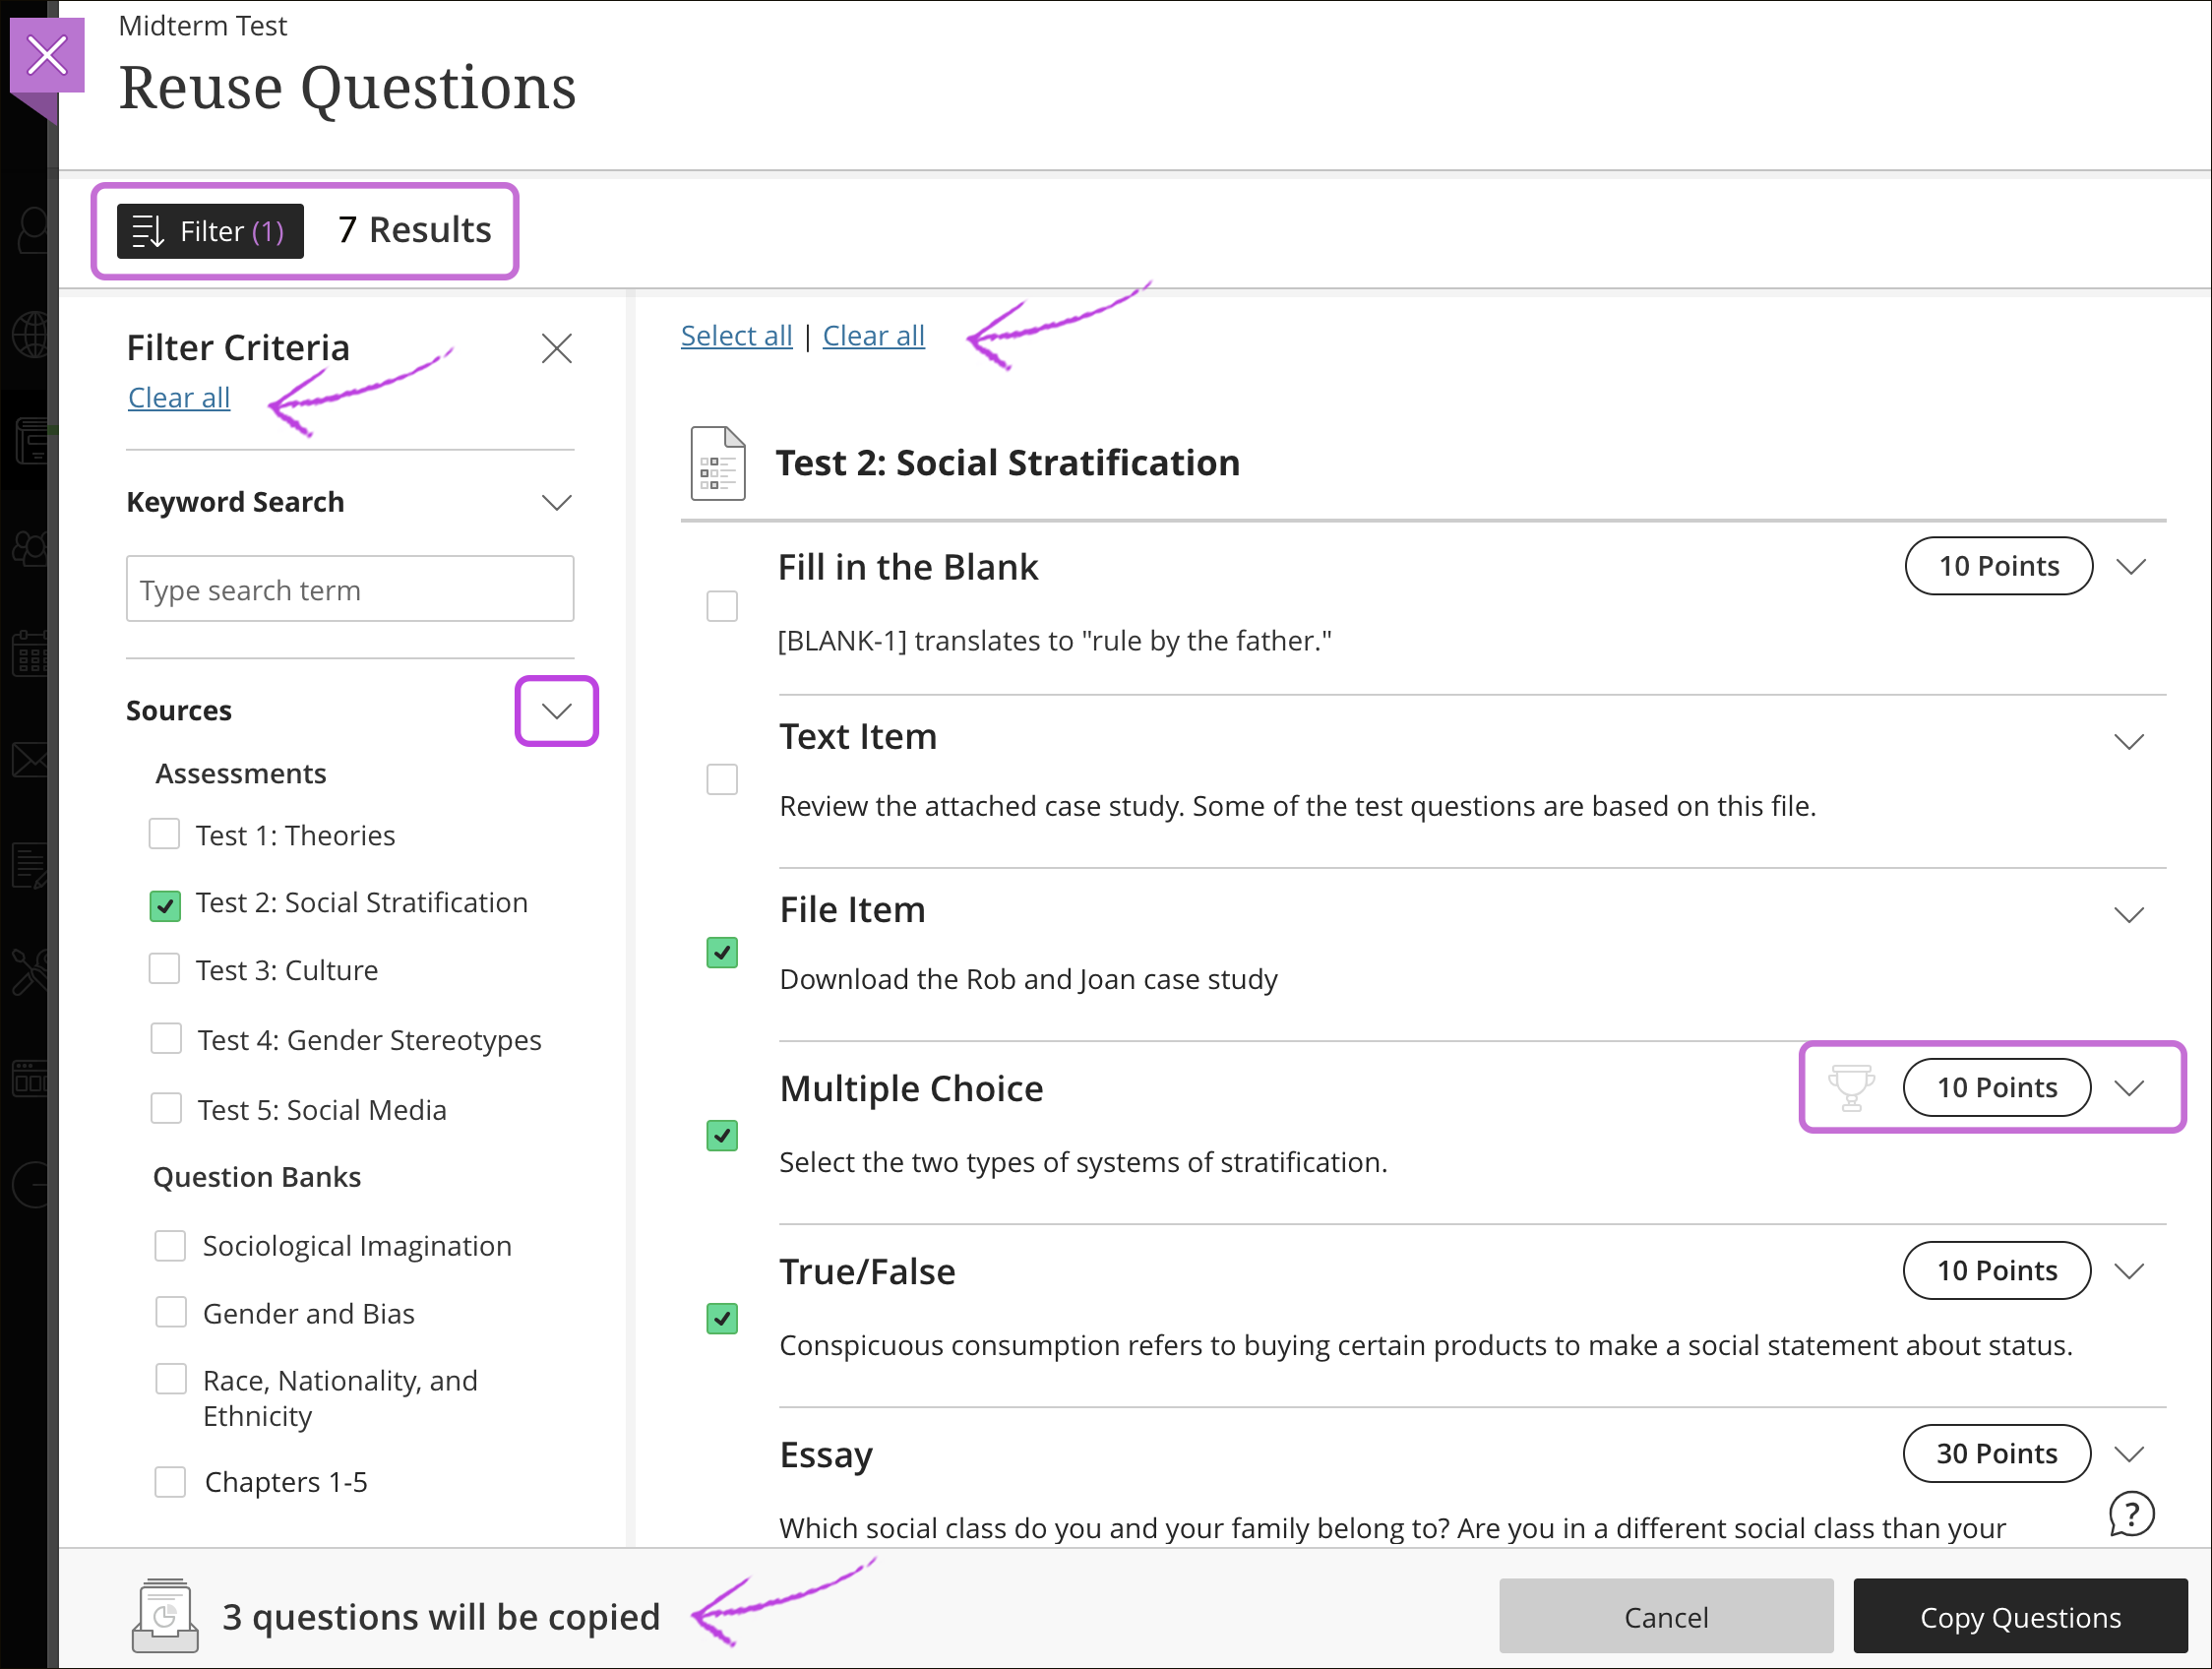 Reuse questions filter panel open highlighting the clear all option